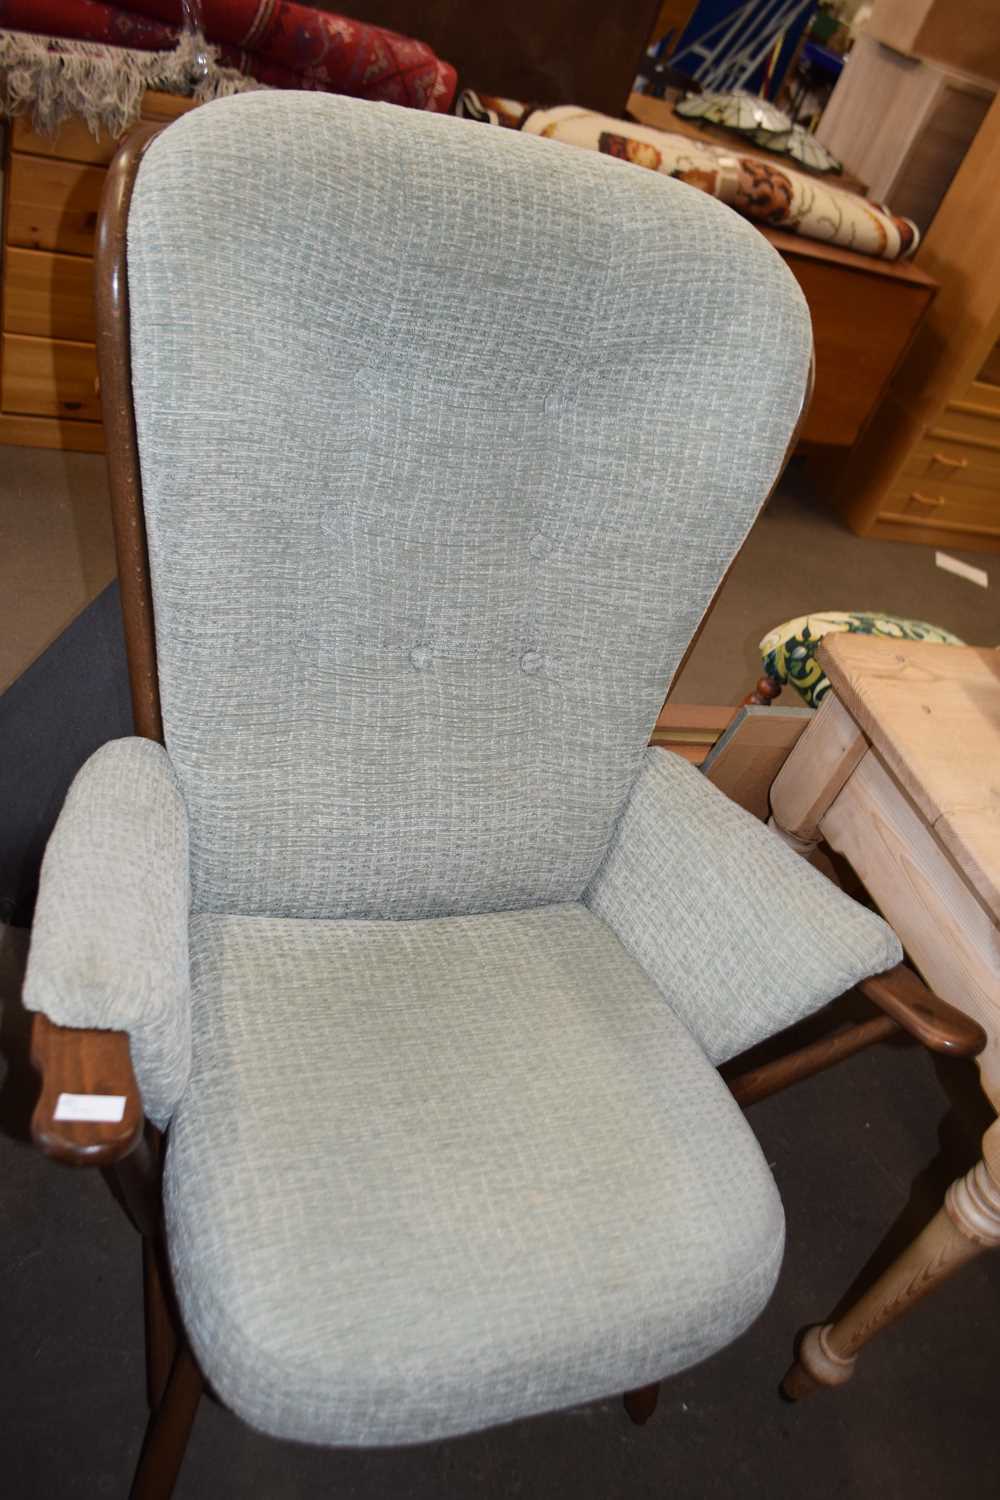 An upholstered easy chair